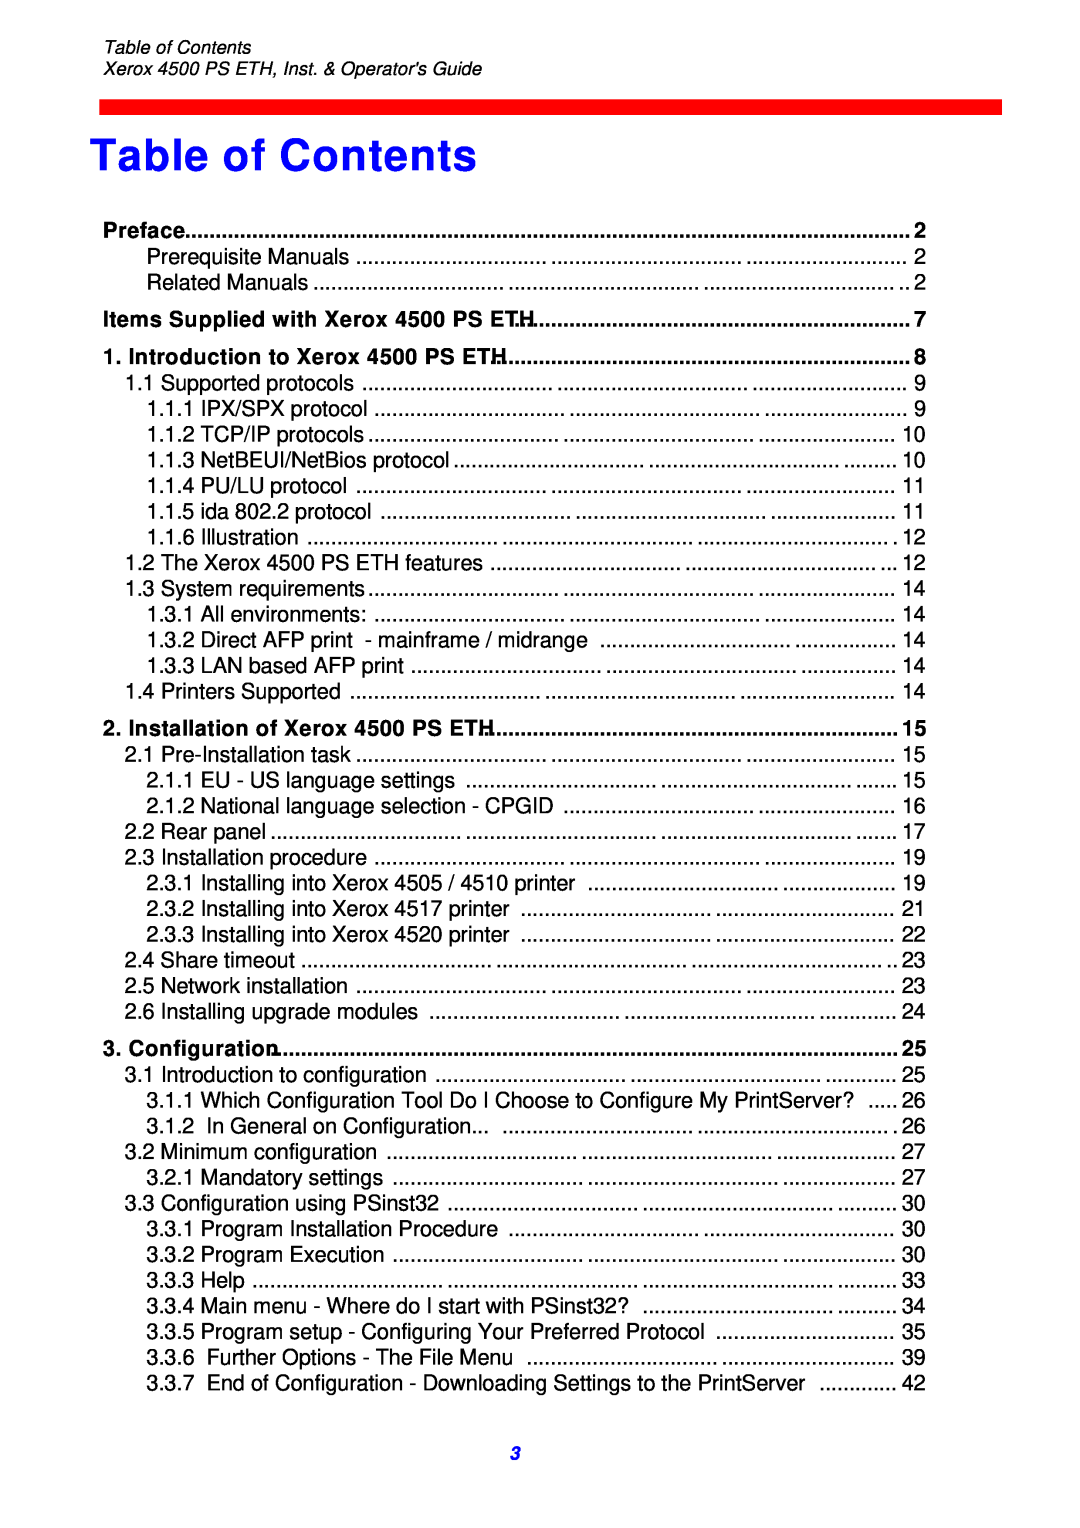 Xerox 4500 ps eth Table of Contents, Preface, Items Supplied with Xerox 4500 PS ETH, Introduction to Xerox 4500 PS ETH 